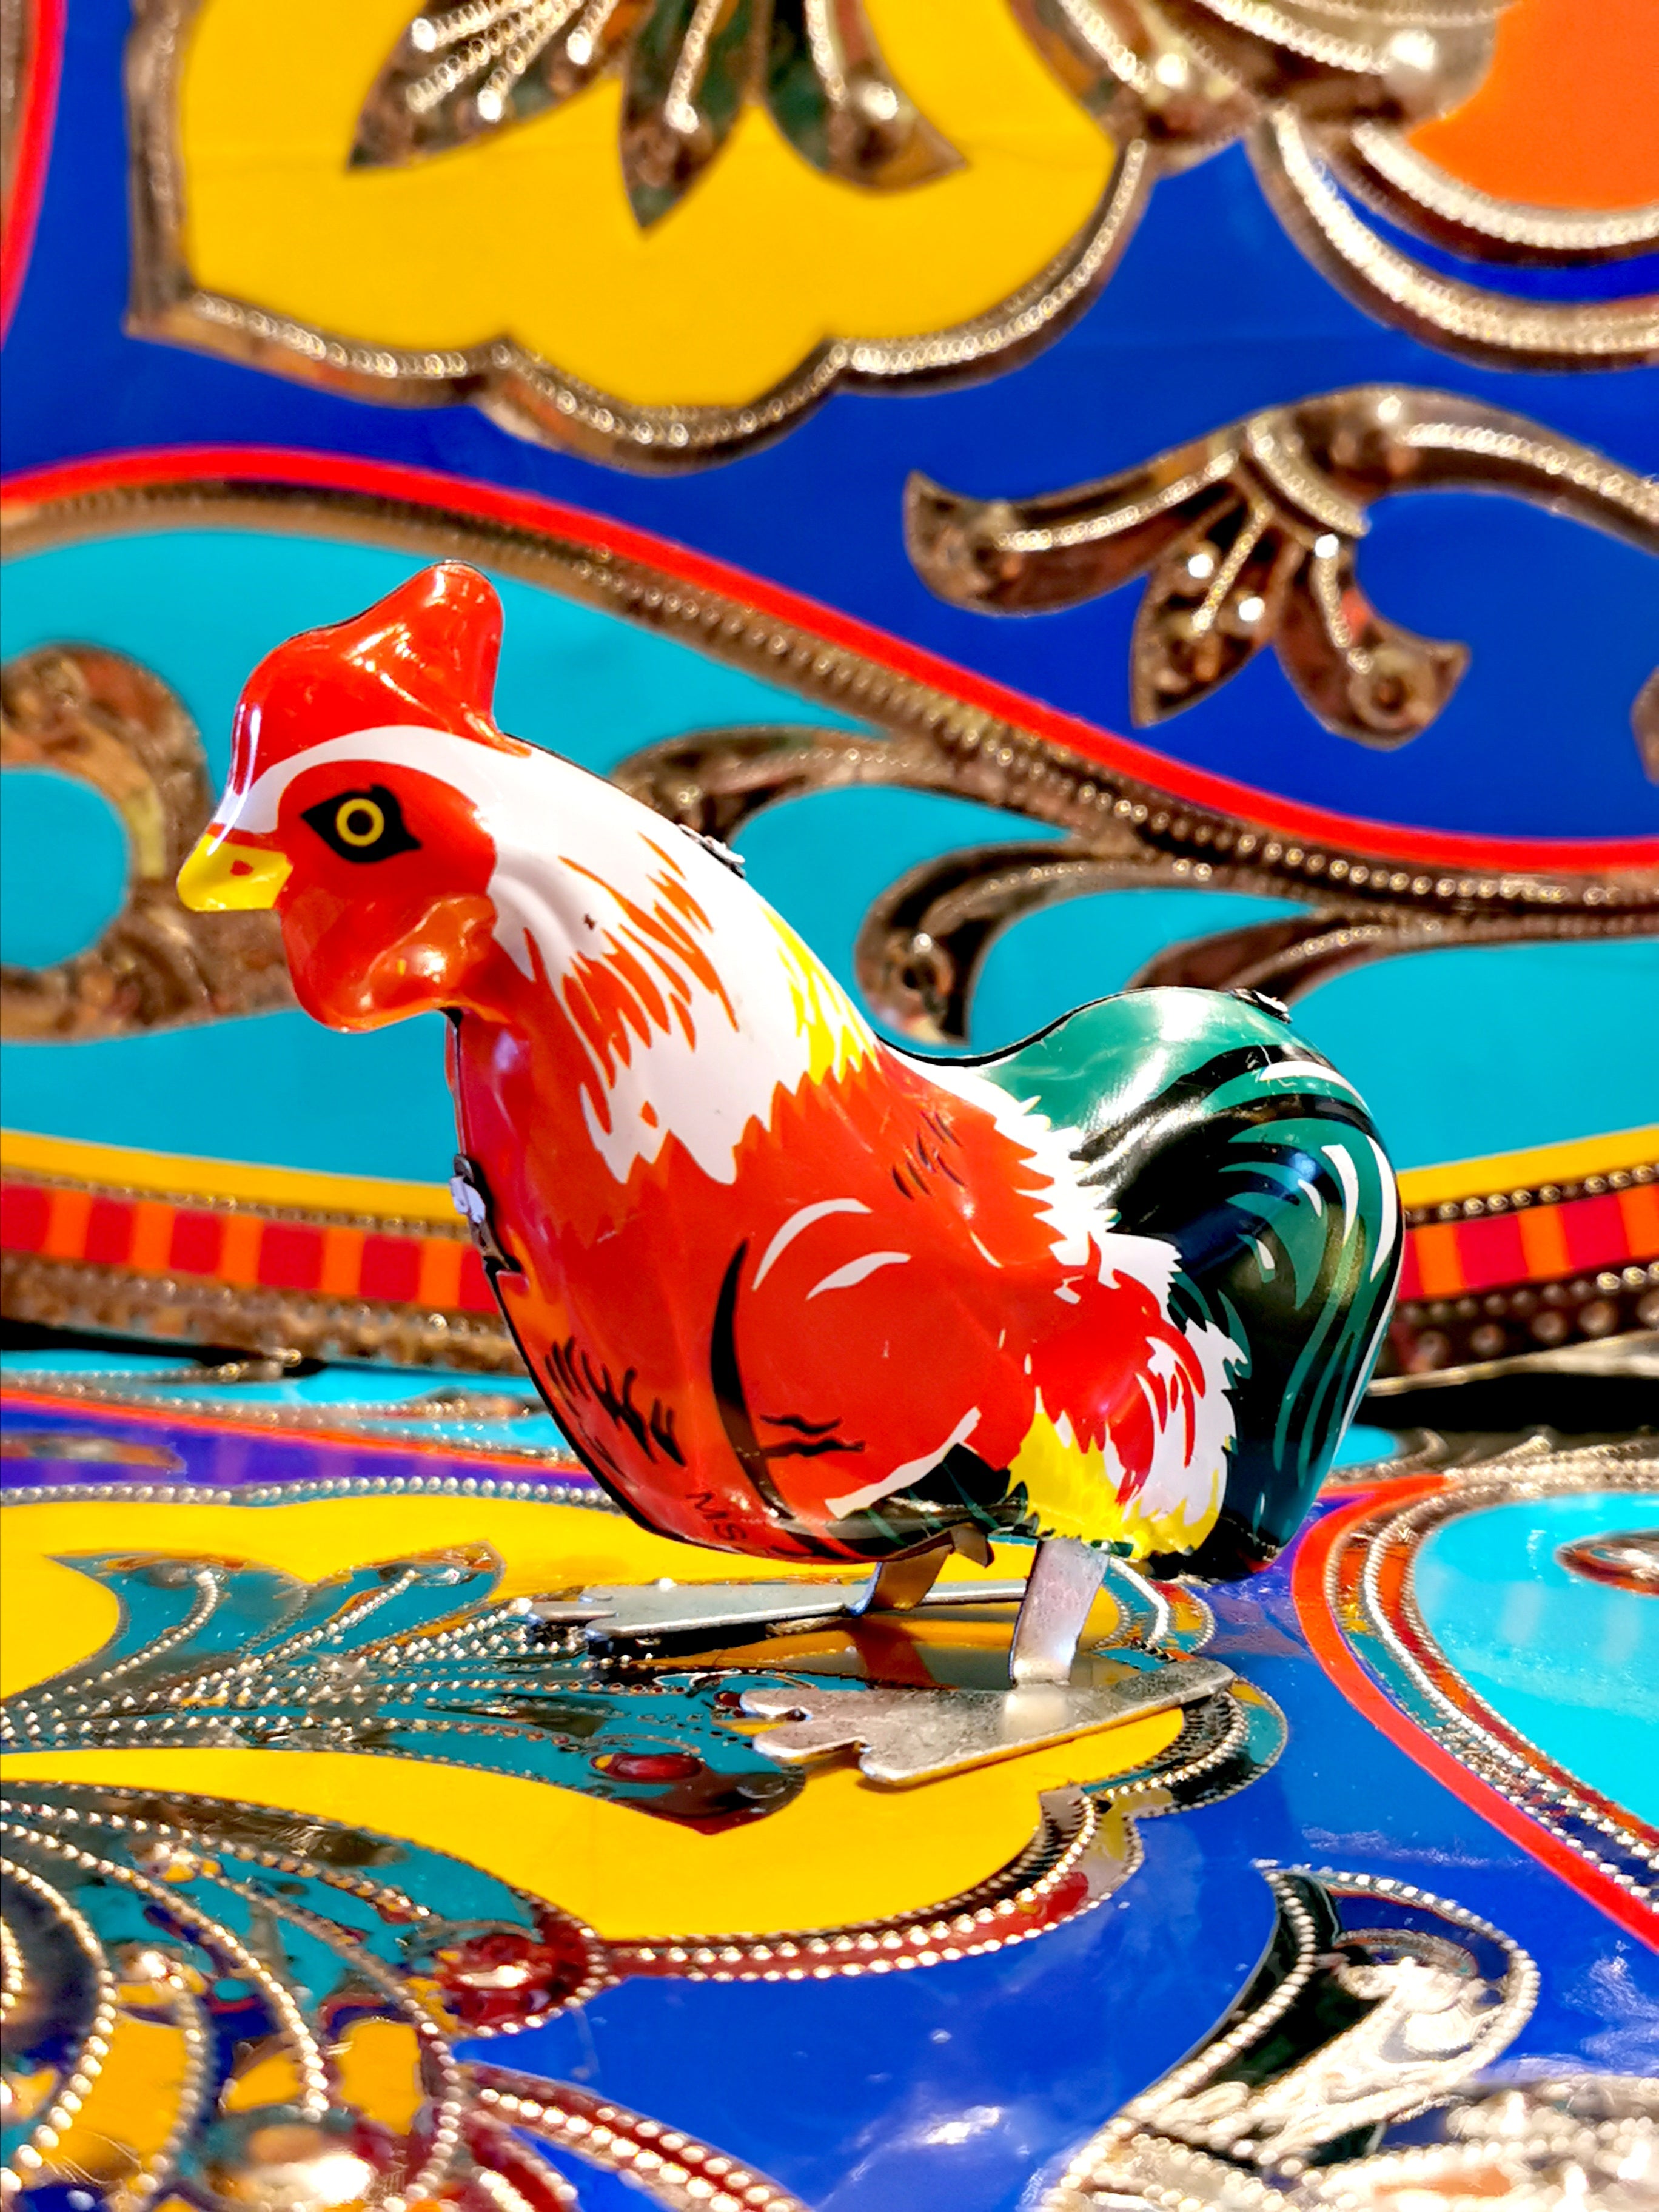 Jumpy clockwork tin rooster for fun! 

Collectable tin toy

8.5cm x 7.5cm x 4cm

Not suitable for children 

